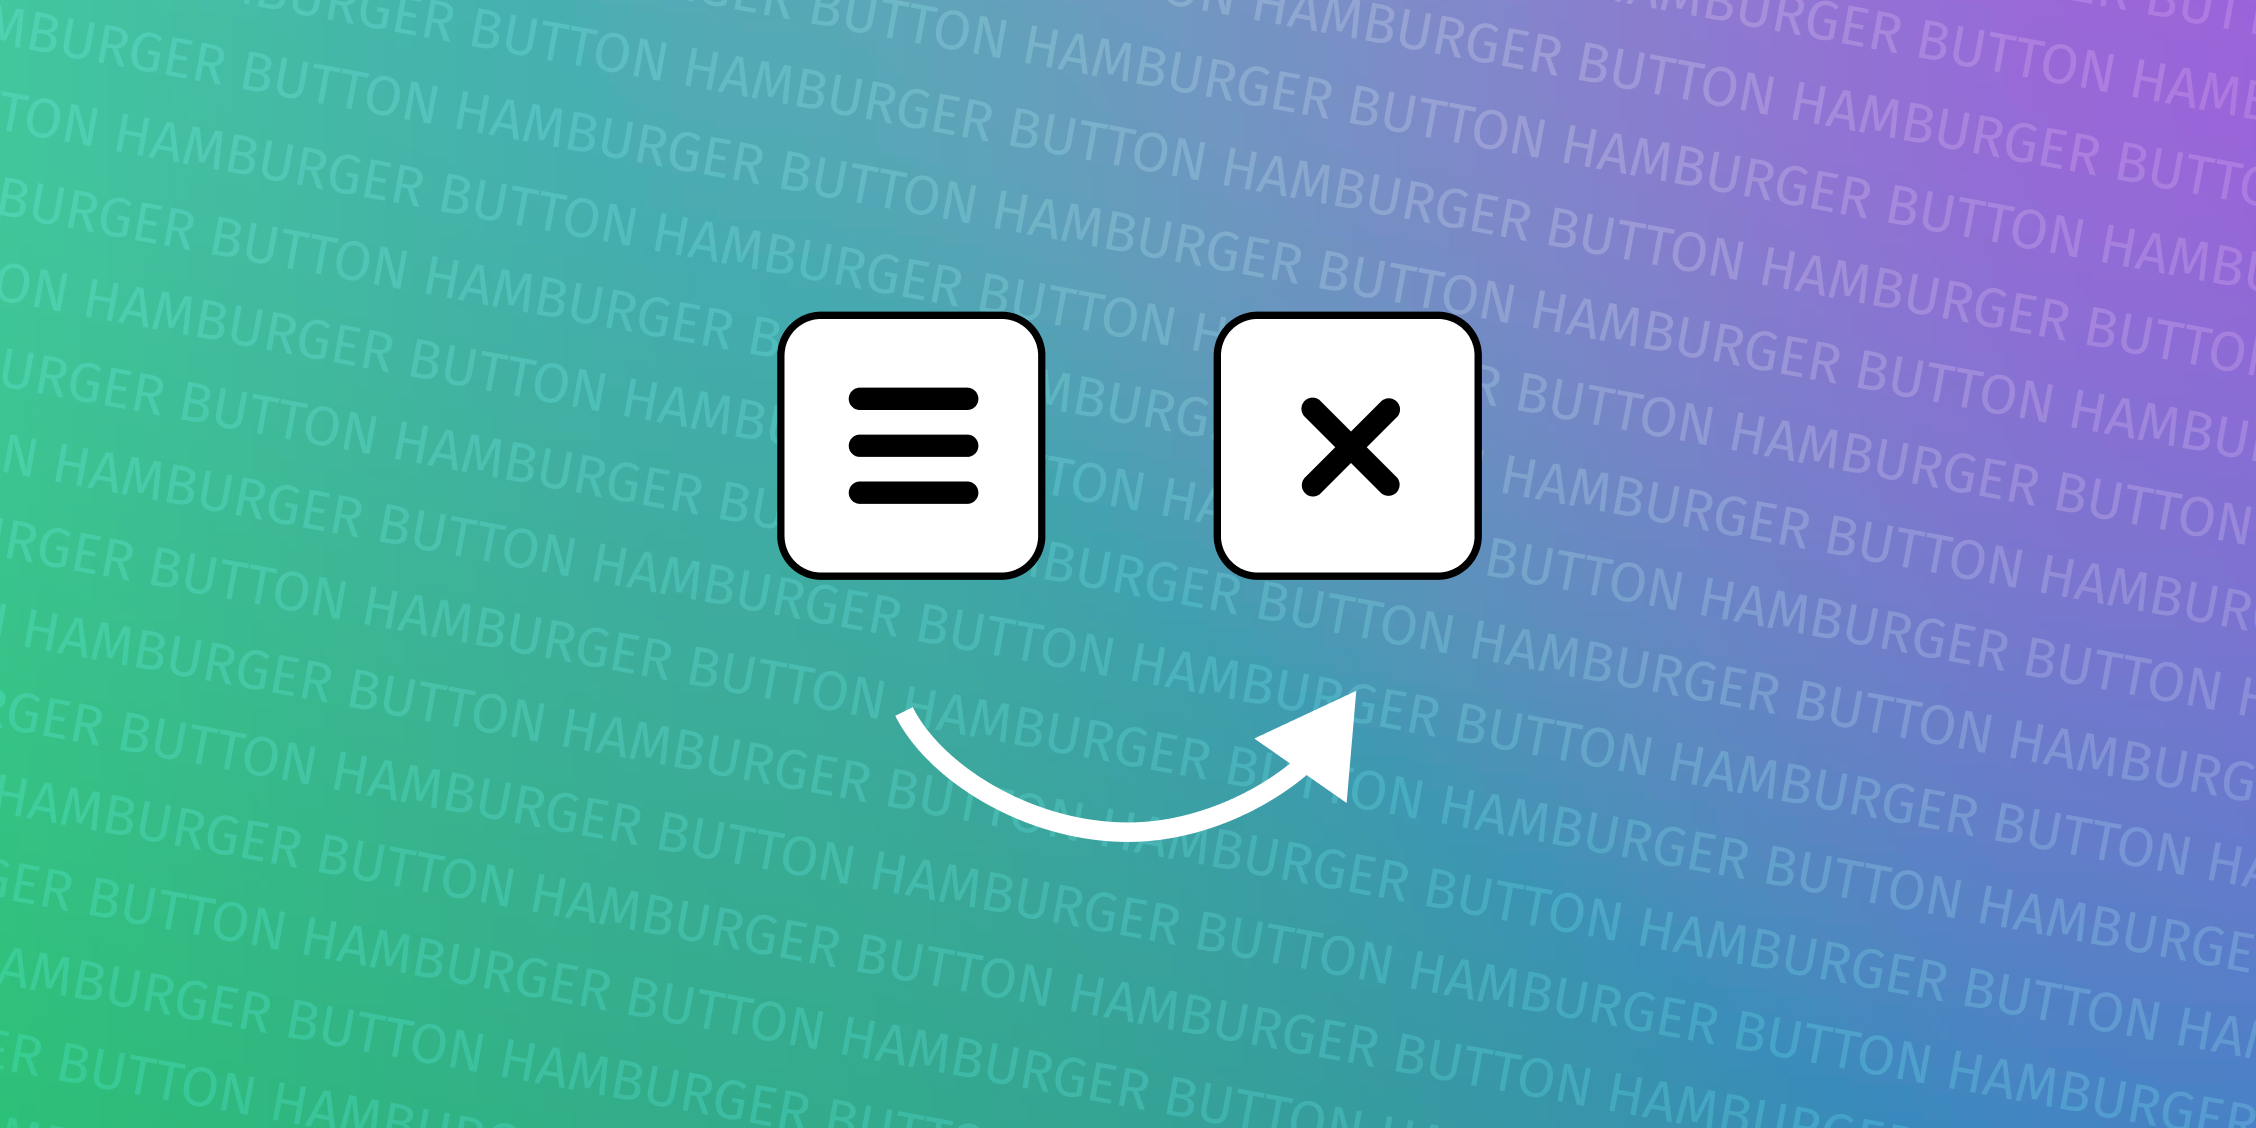 Accessible hamburger buttons without JavaScript